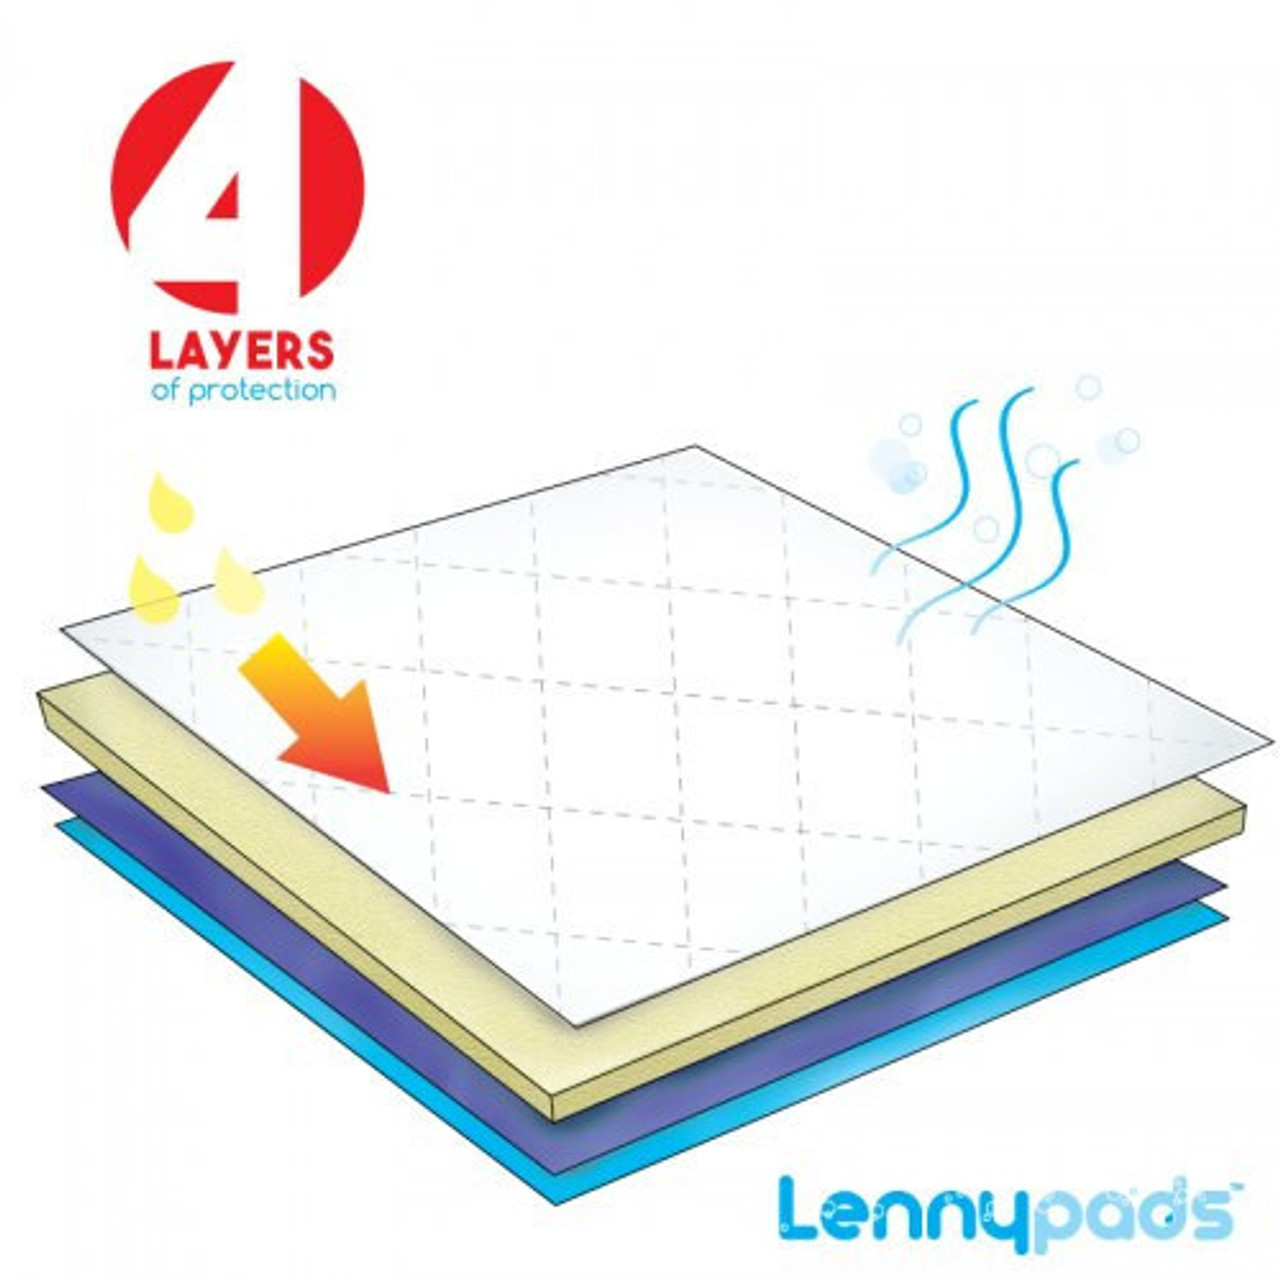 Lennypads 4 layers of protection